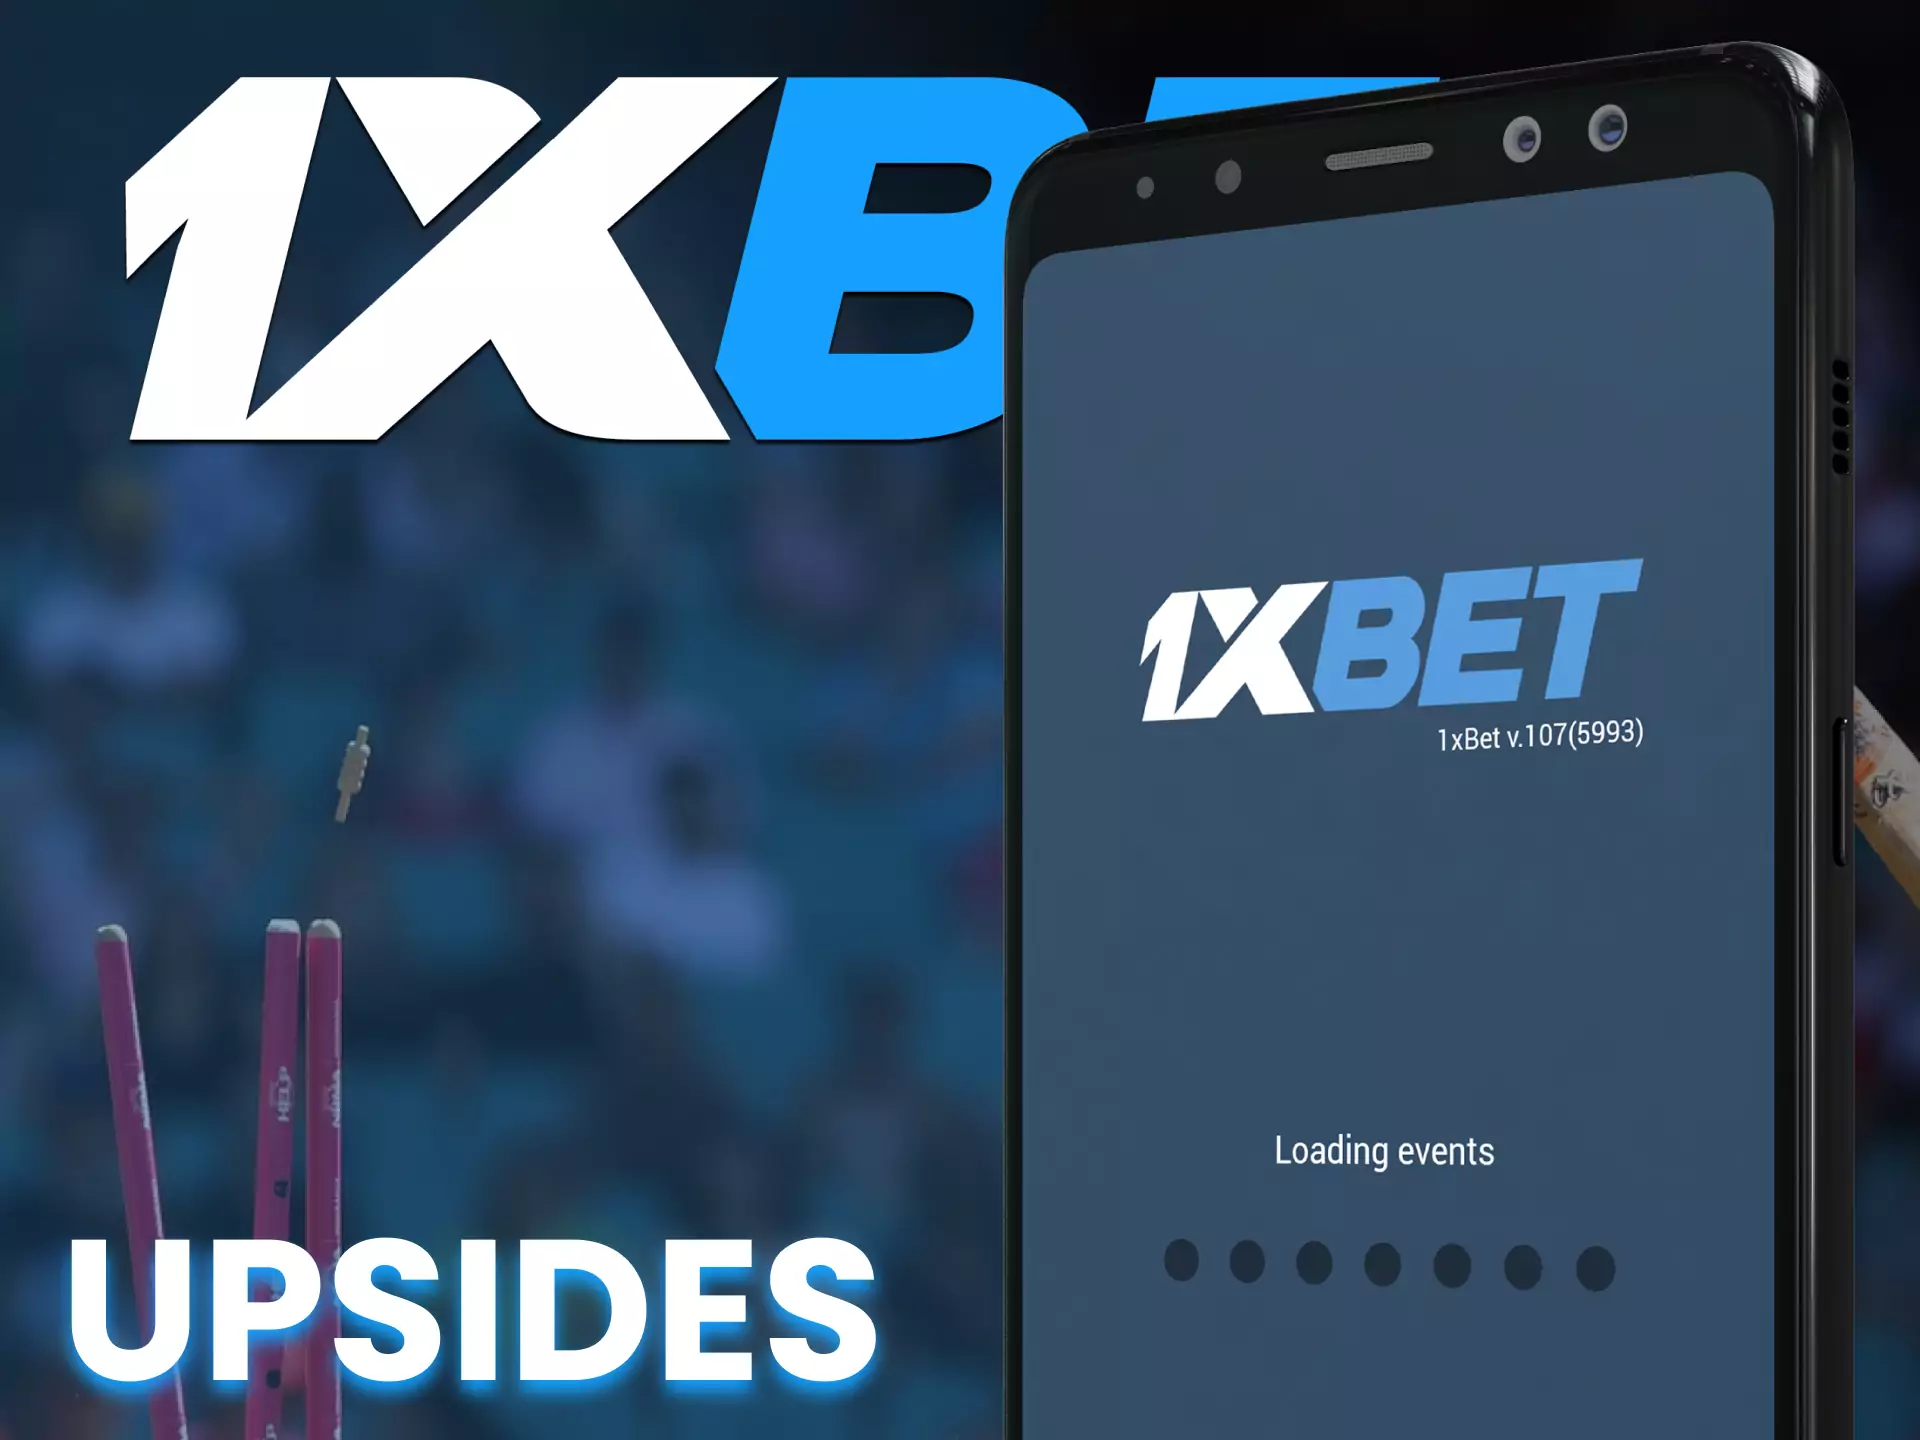 Learn about the upsides of 1xBet.